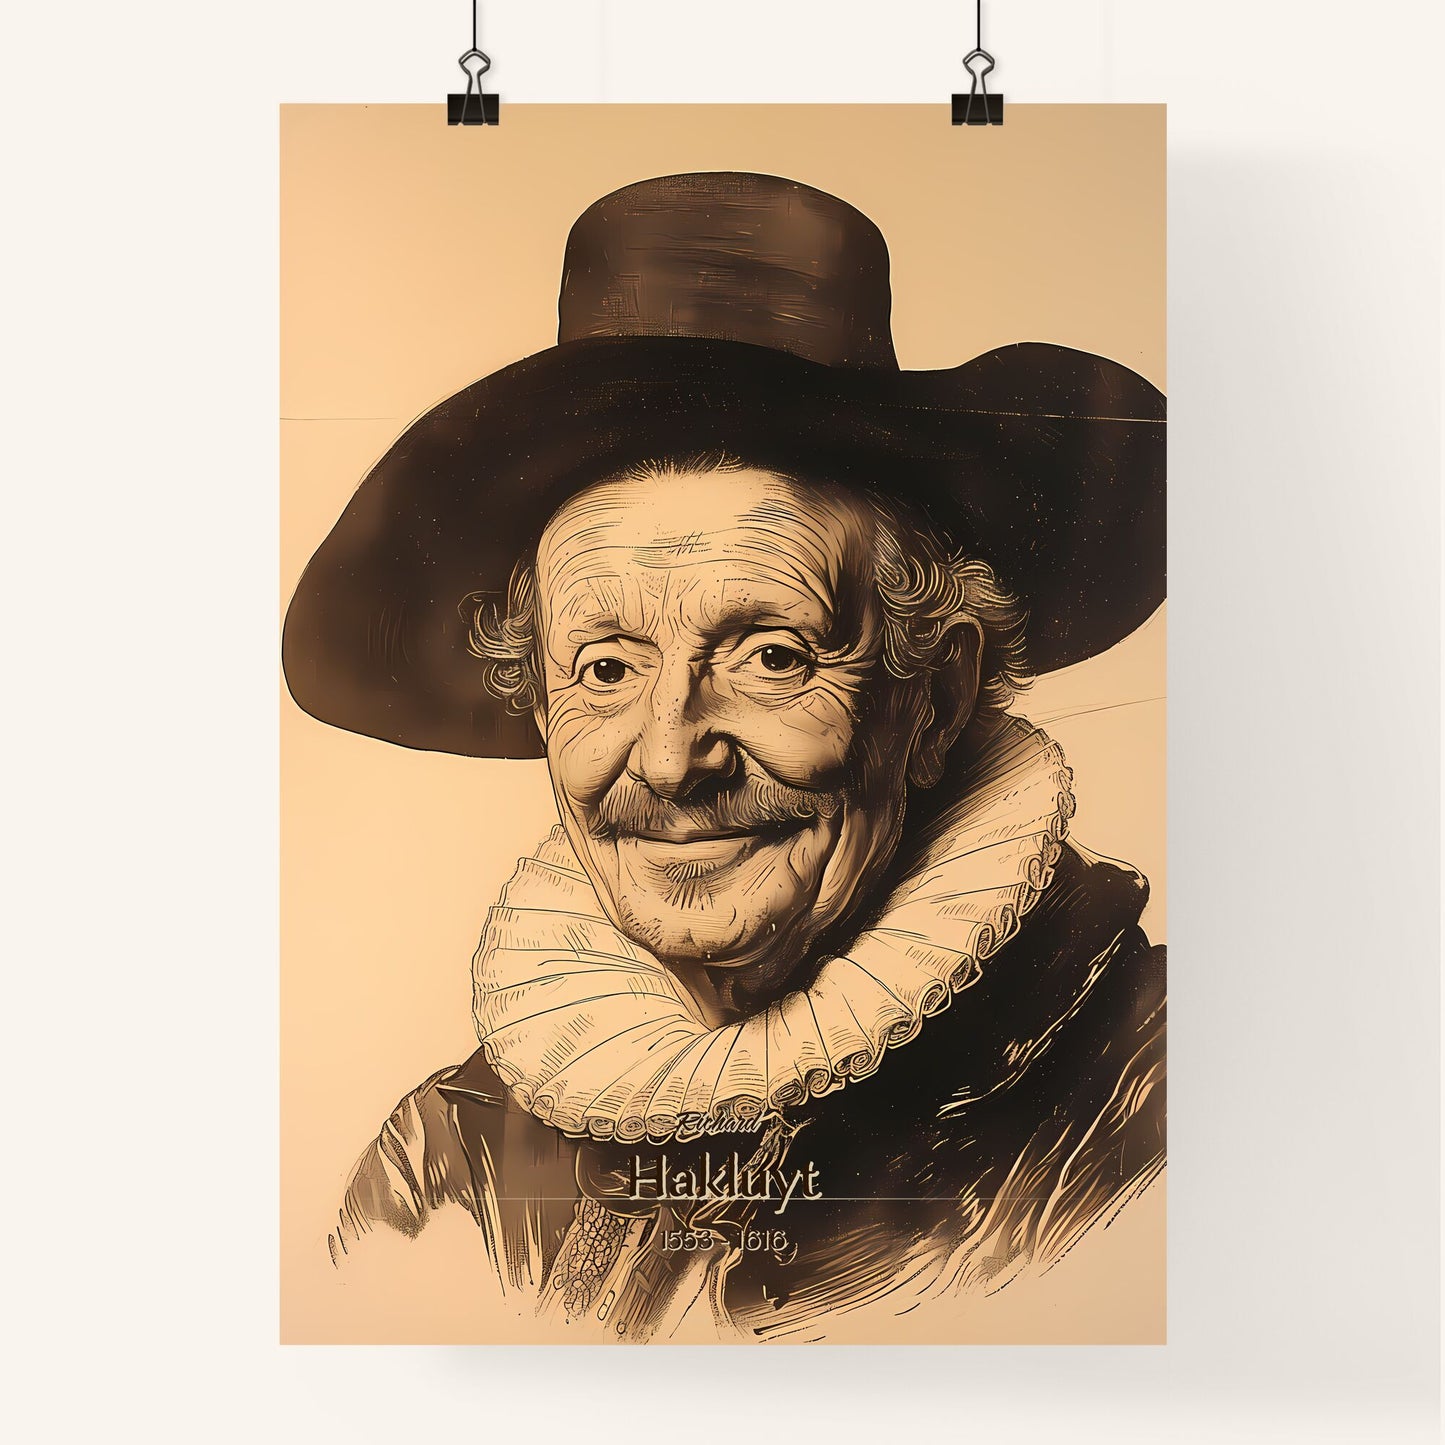 Richard, Hakluyt, 1553 - 1616, A Poster of a man wearing a hat and a ruffled collar Default Title